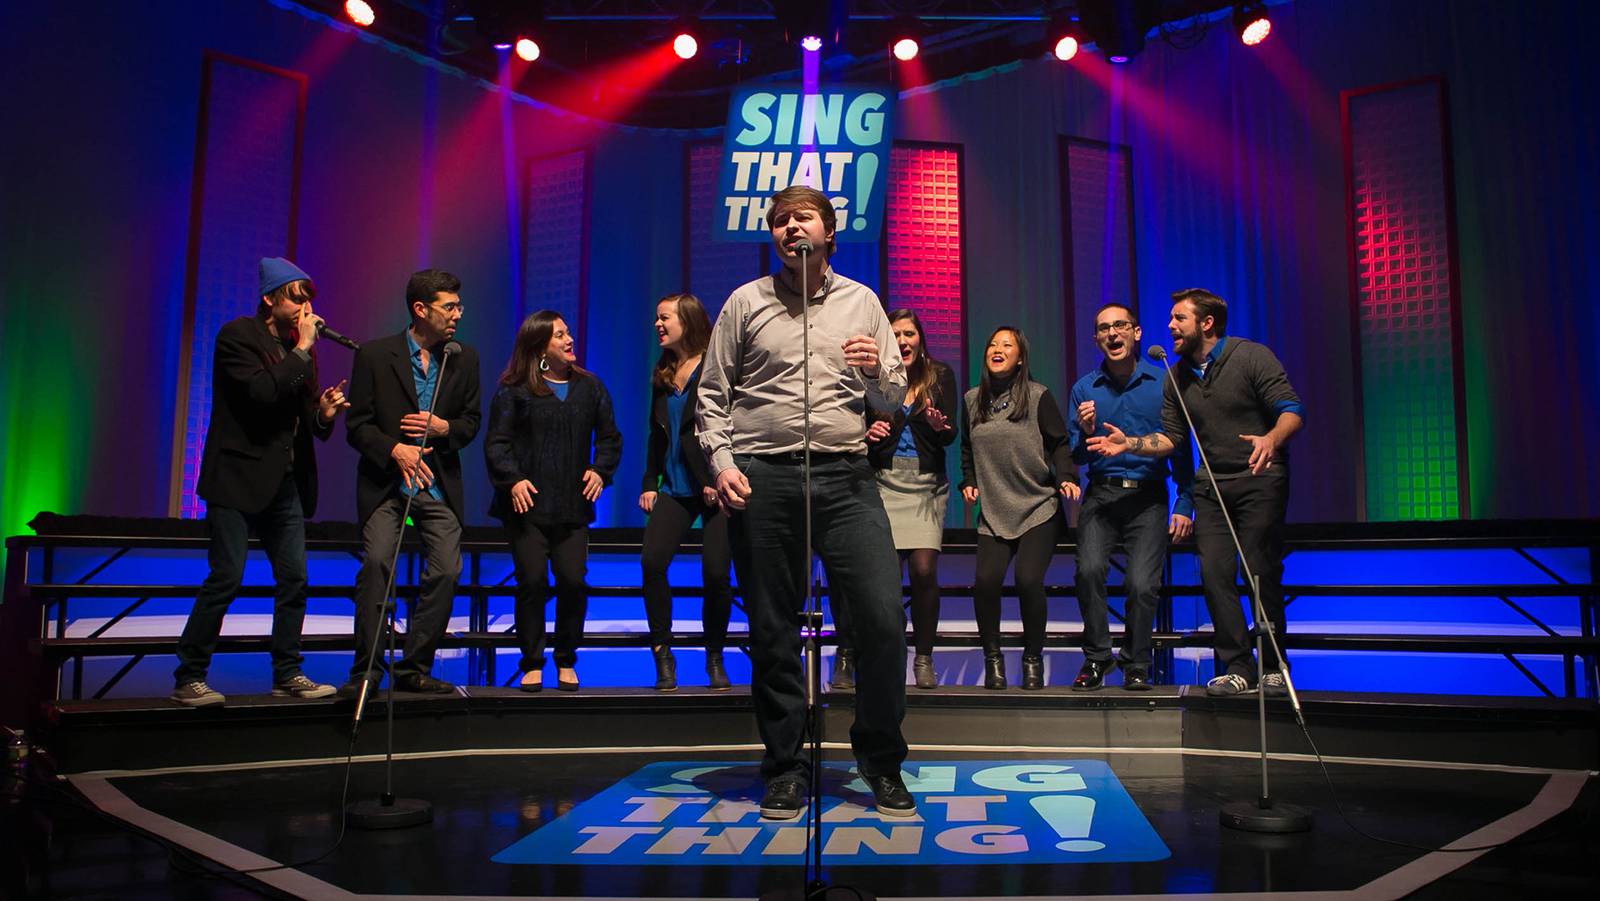 Immutable on WGBH's Sing That Thing